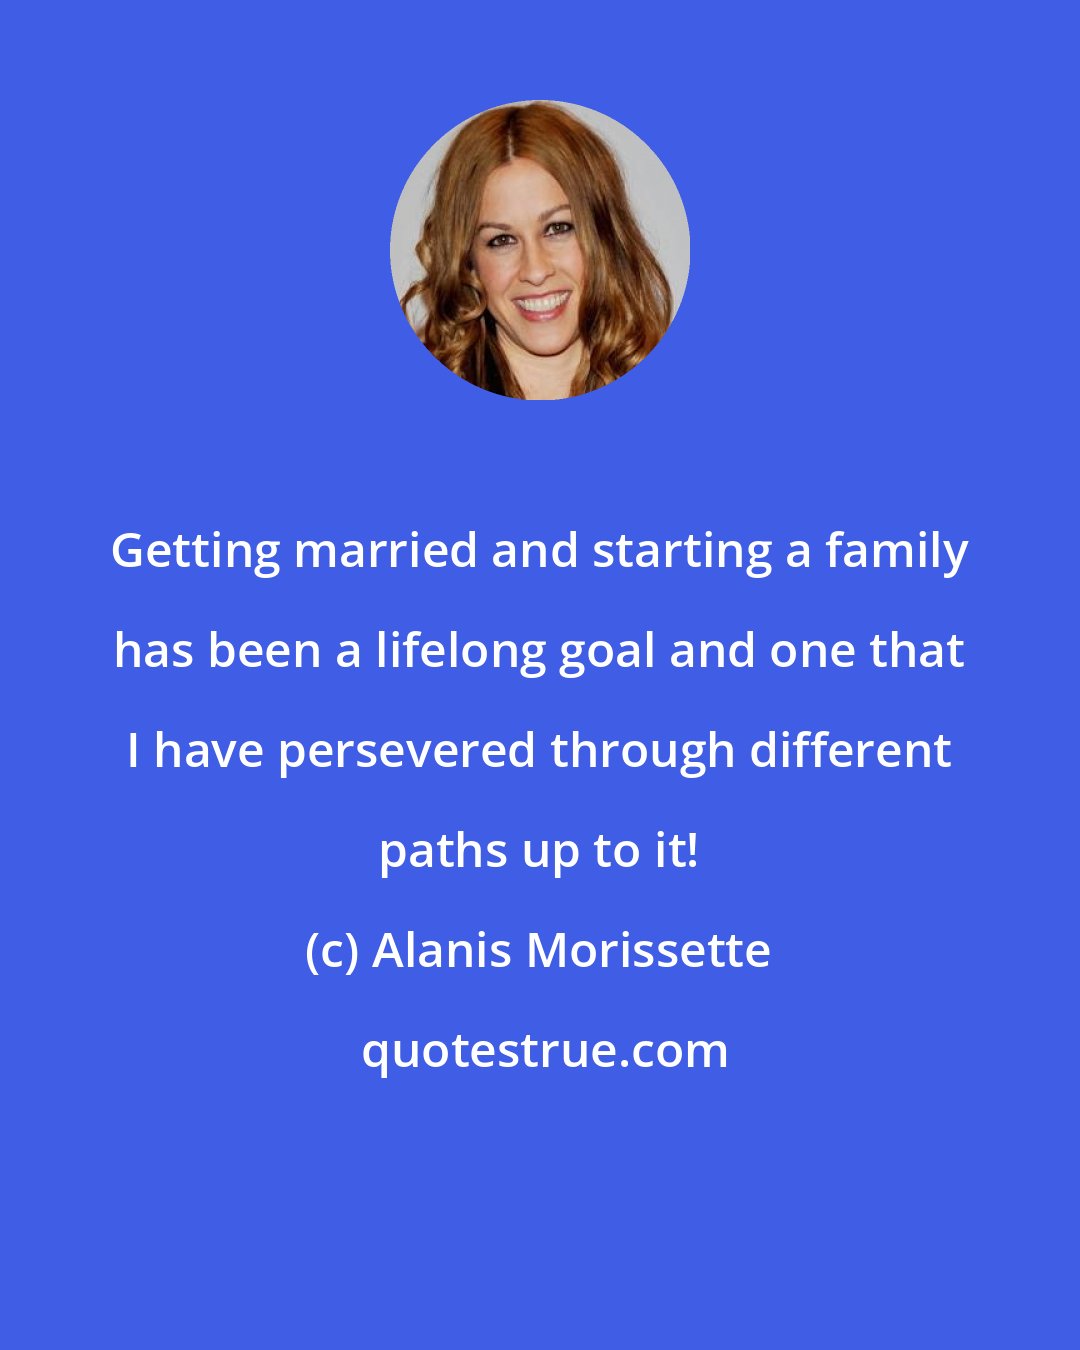 Alanis Morissette: Getting married and starting a family has been a lifelong goal and one that I have persevered through different paths up to it!